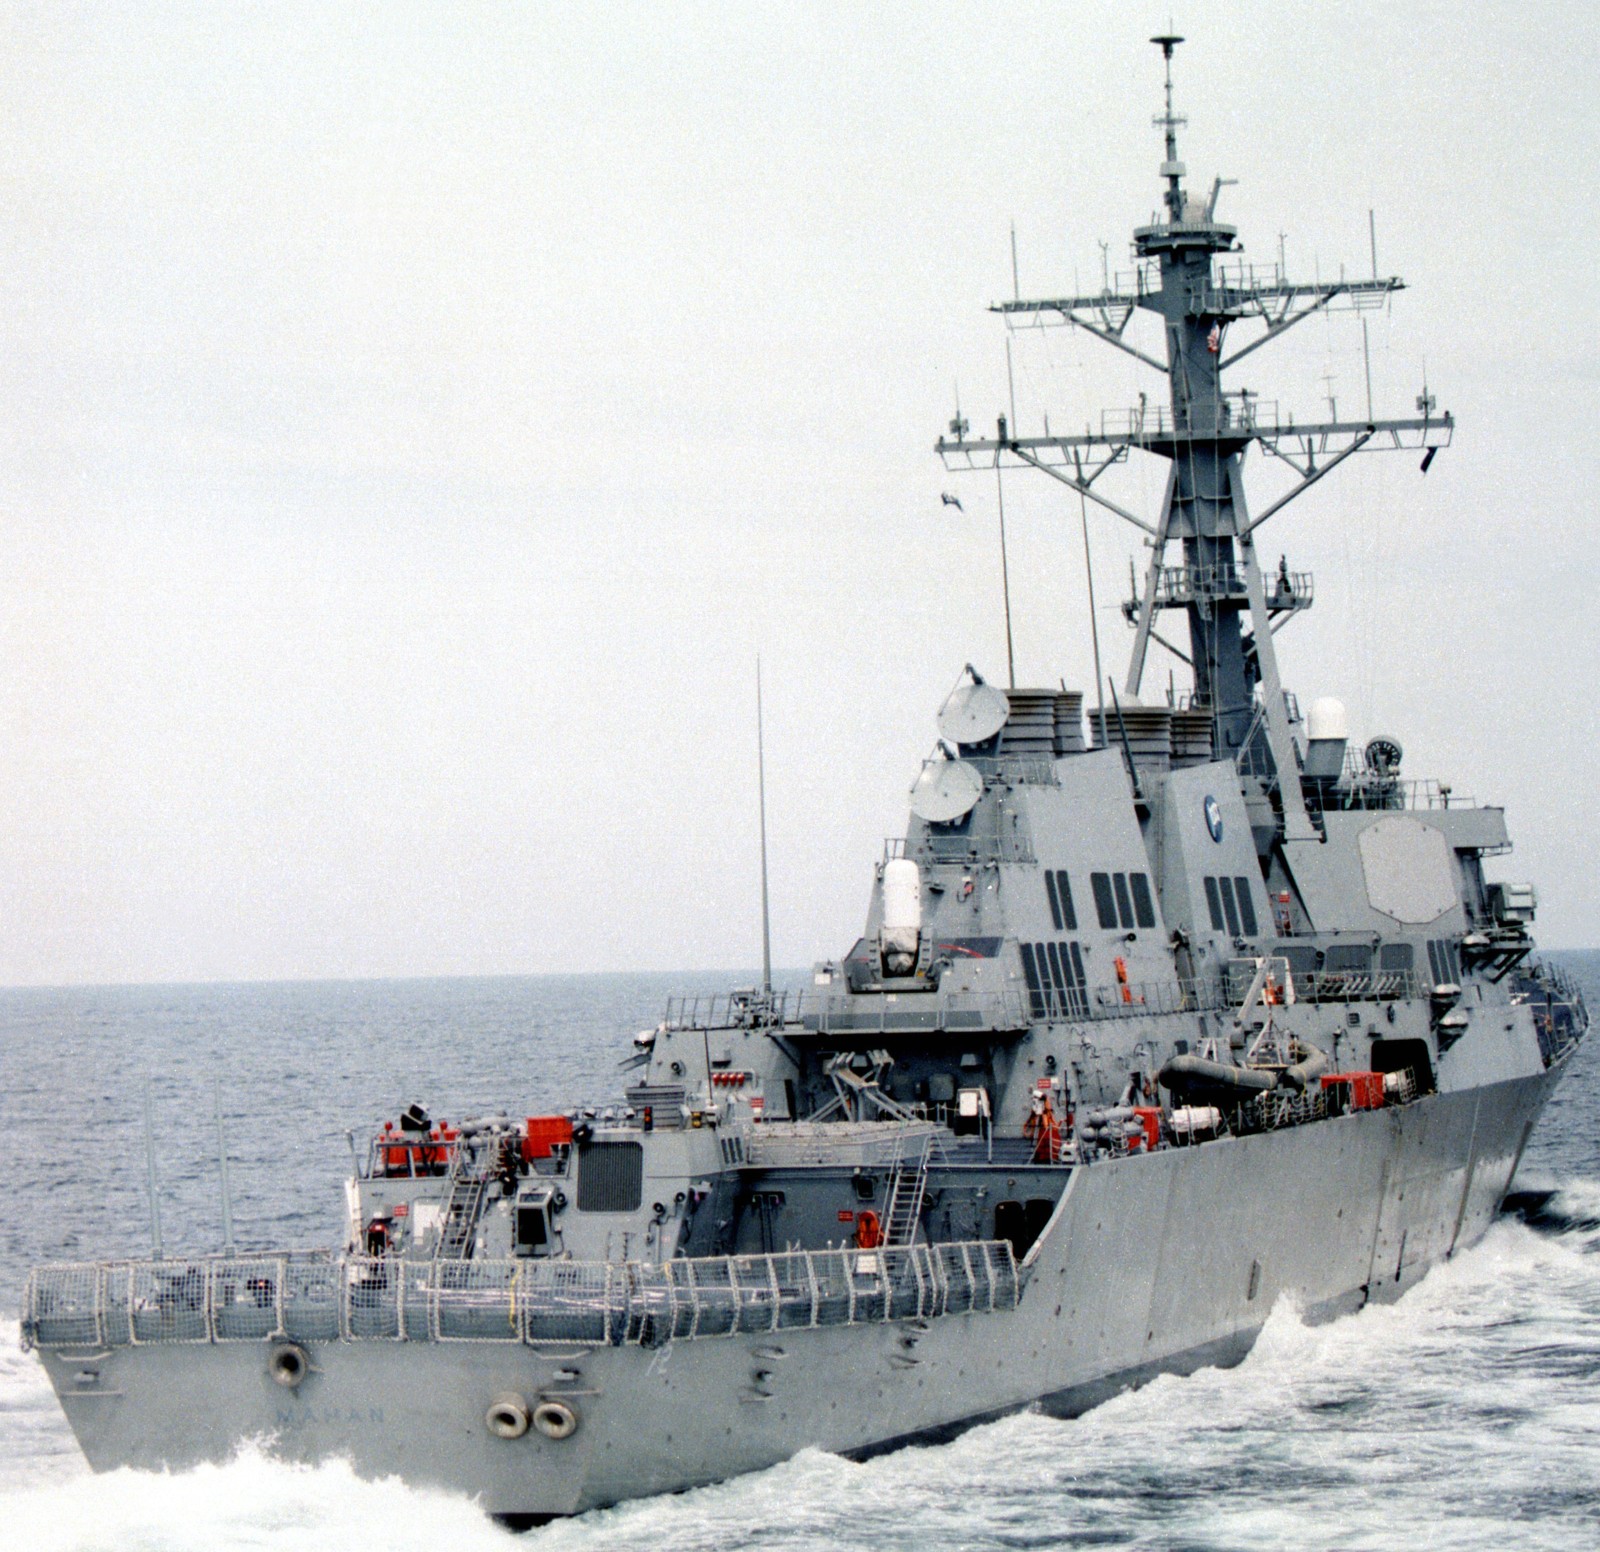 ddg-72 uss mahan guided missile destroyer arleigh burke class aegis bmd 46